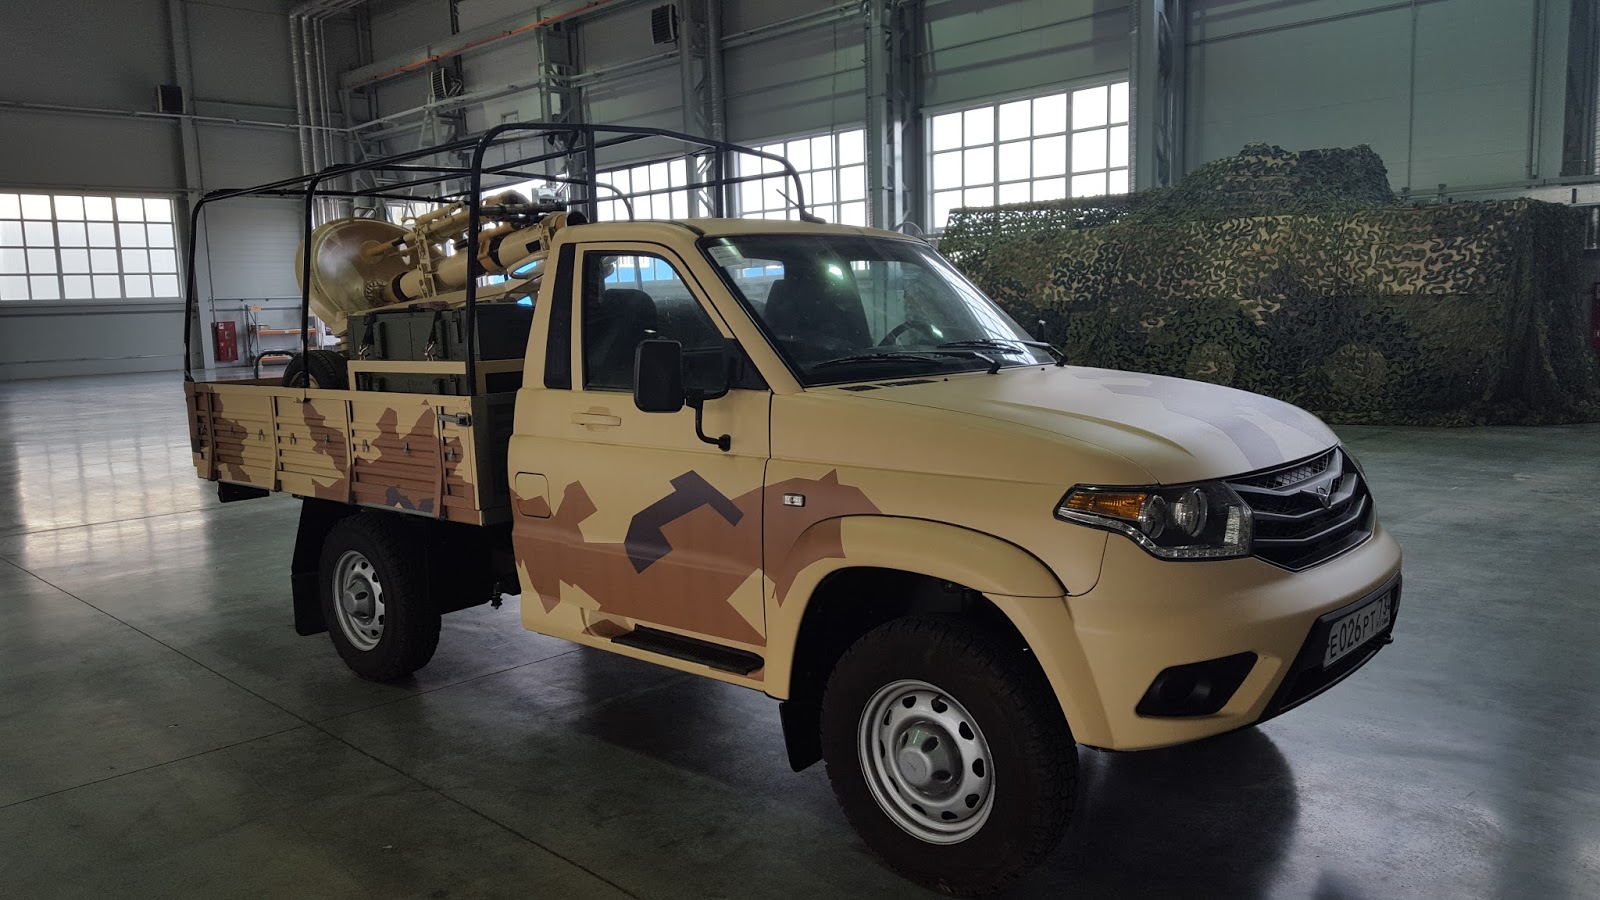 New Details About Usage of Russian-Made UAZ Patriot Technical Vehicles on Syrian Battlefield